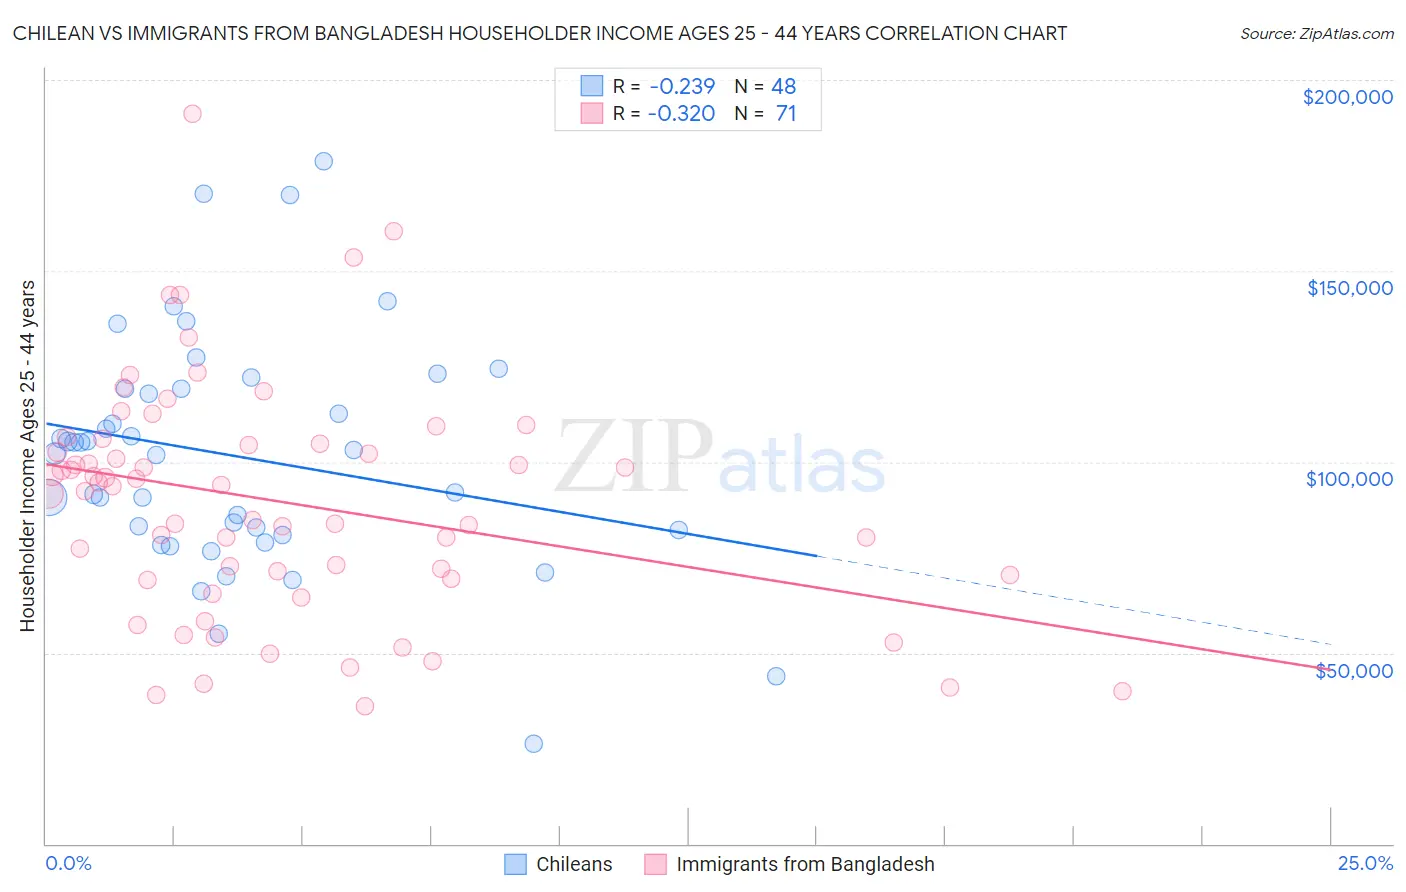 Chilean vs Immigrants from Bangladesh Householder Income Ages 25 - 44 years